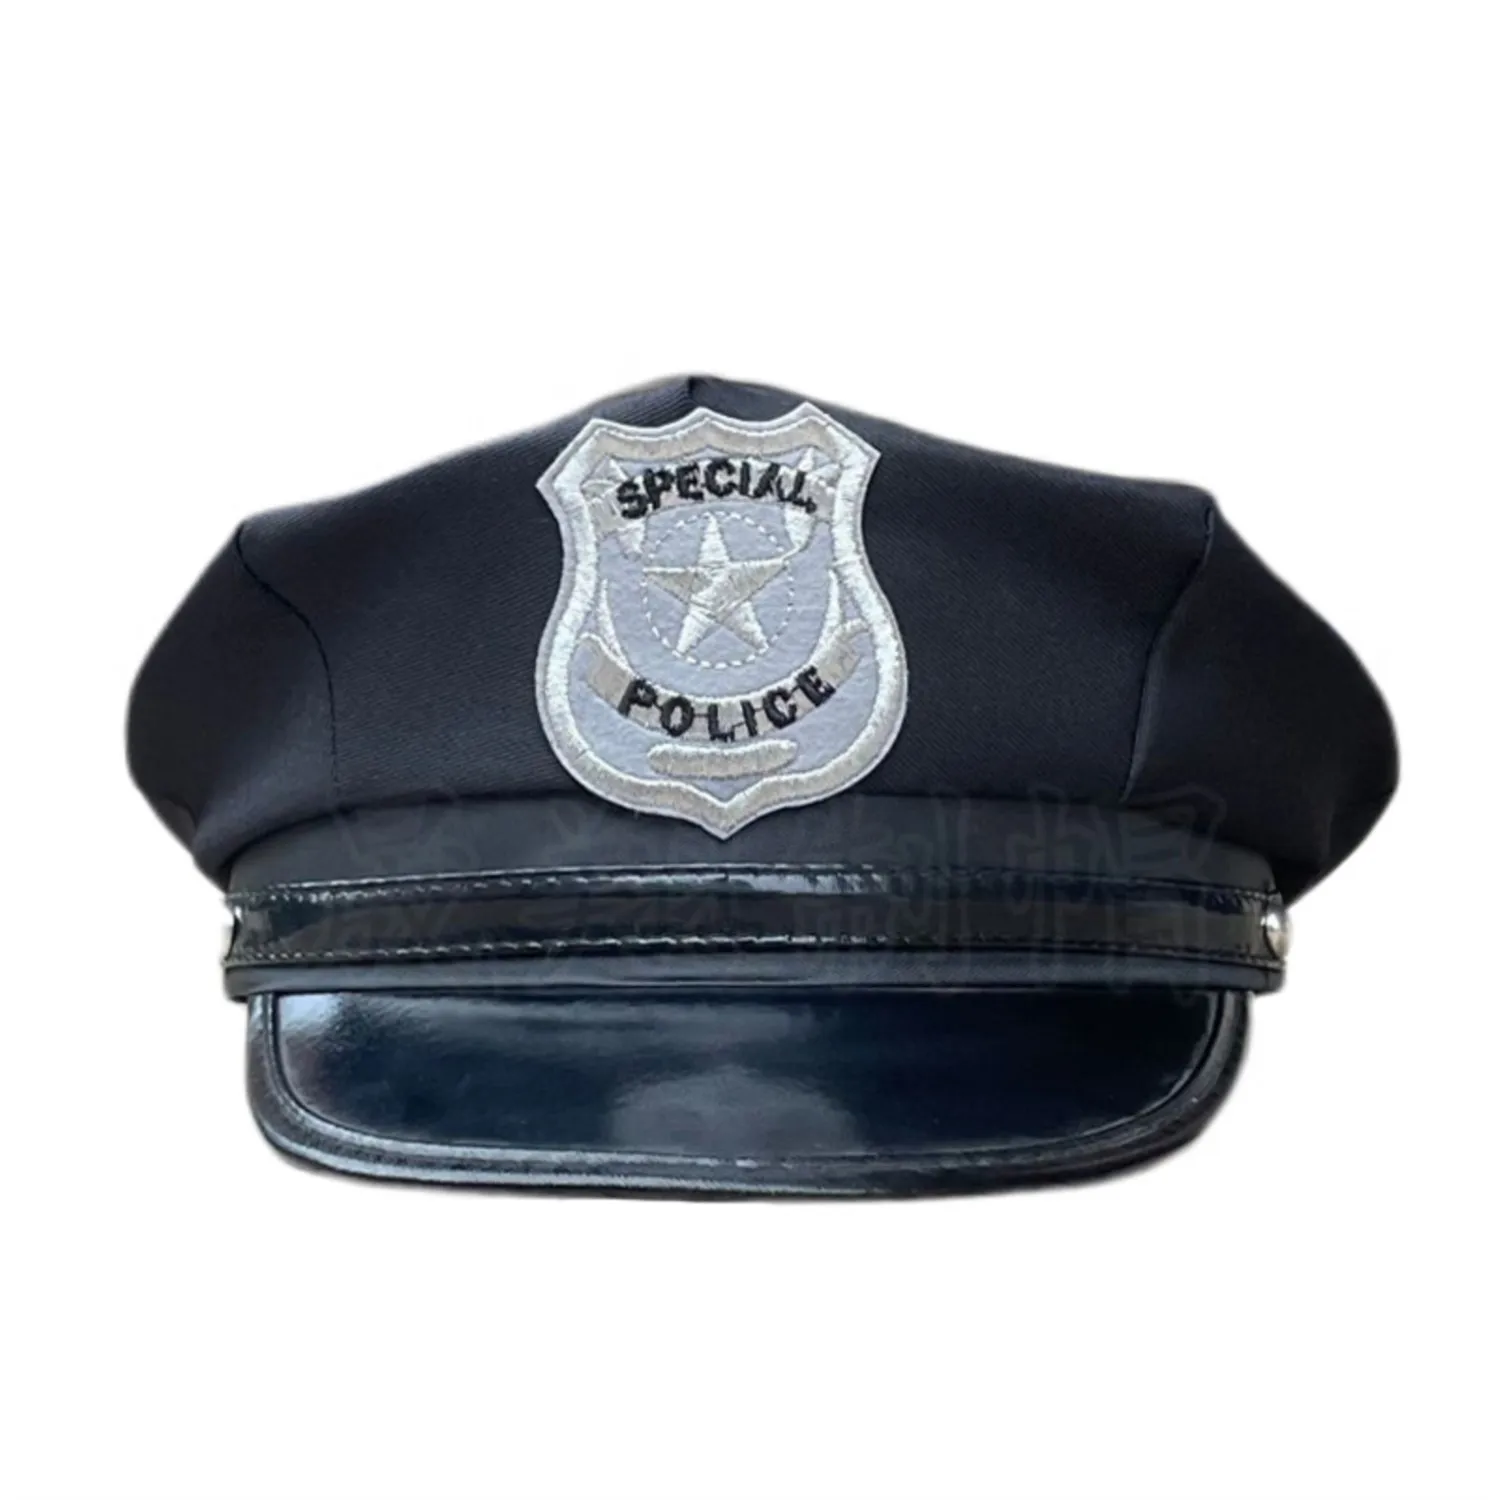 Adult Police Hats For Men And Women Octagonal Flat Cap Role-playing Fun Props U.S. Police Hats Uniform Accessories Free Shipping